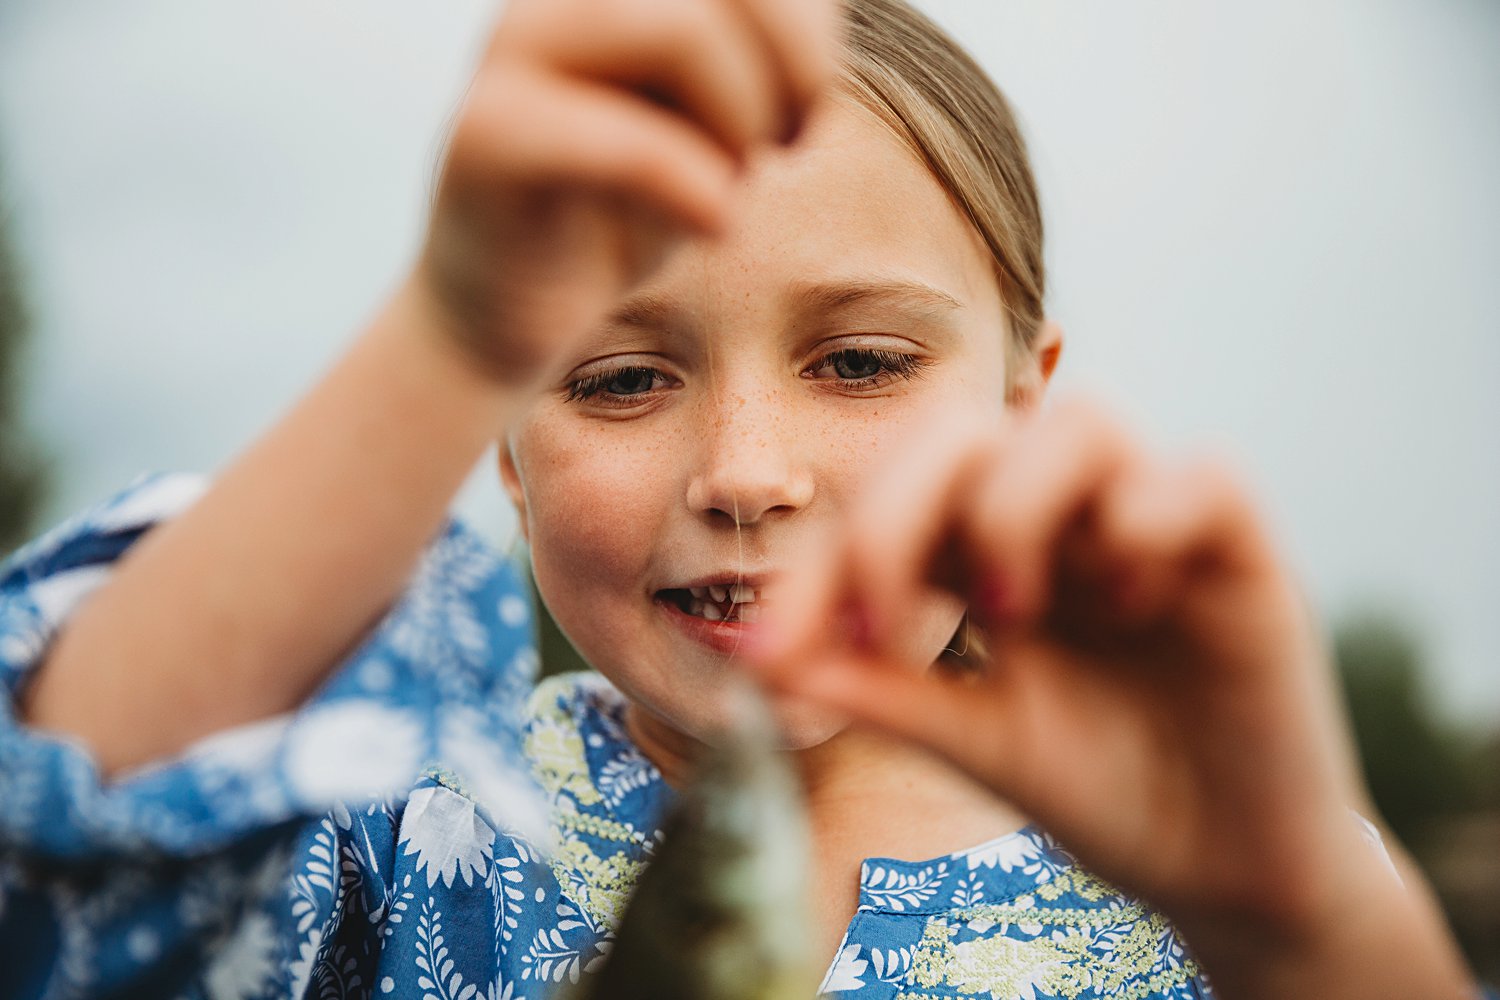 Candid portrait of a young girl catching a fish